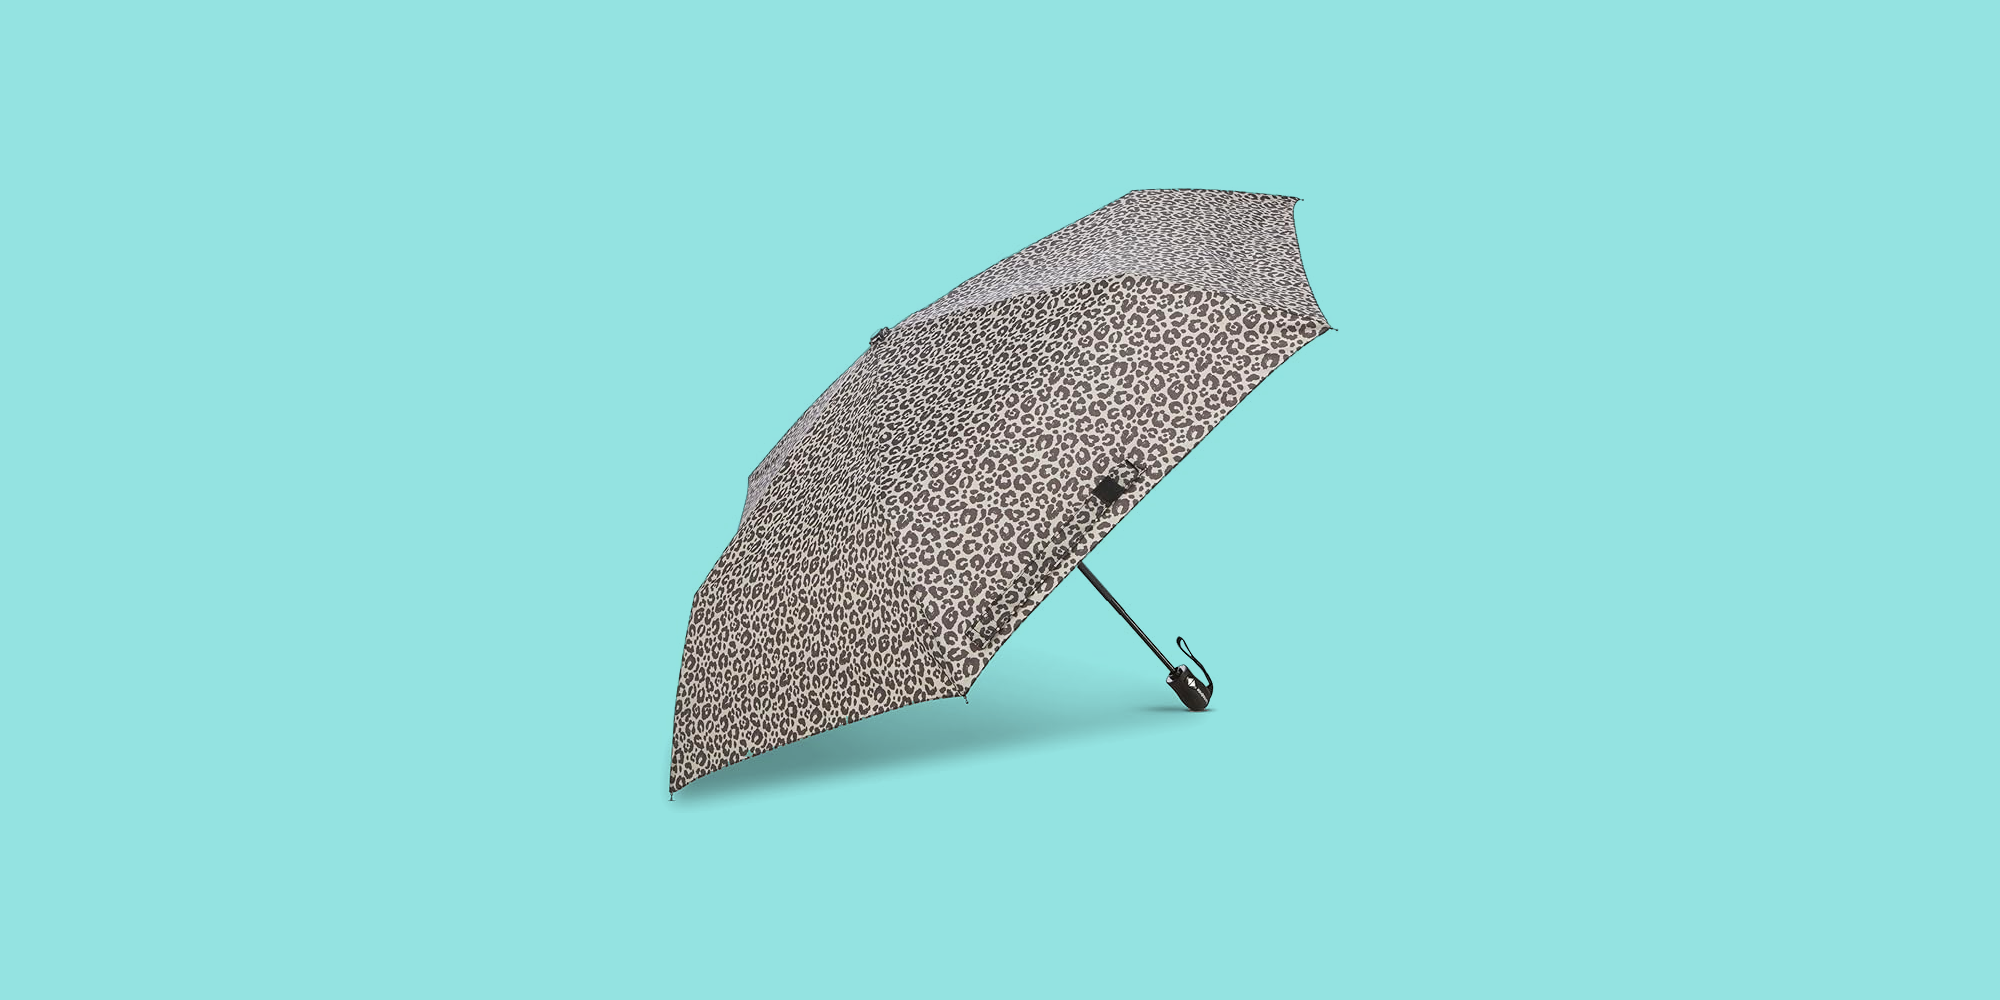 Repel Windproof Travel Umbrella Review: A Small Yet Sturdy Build